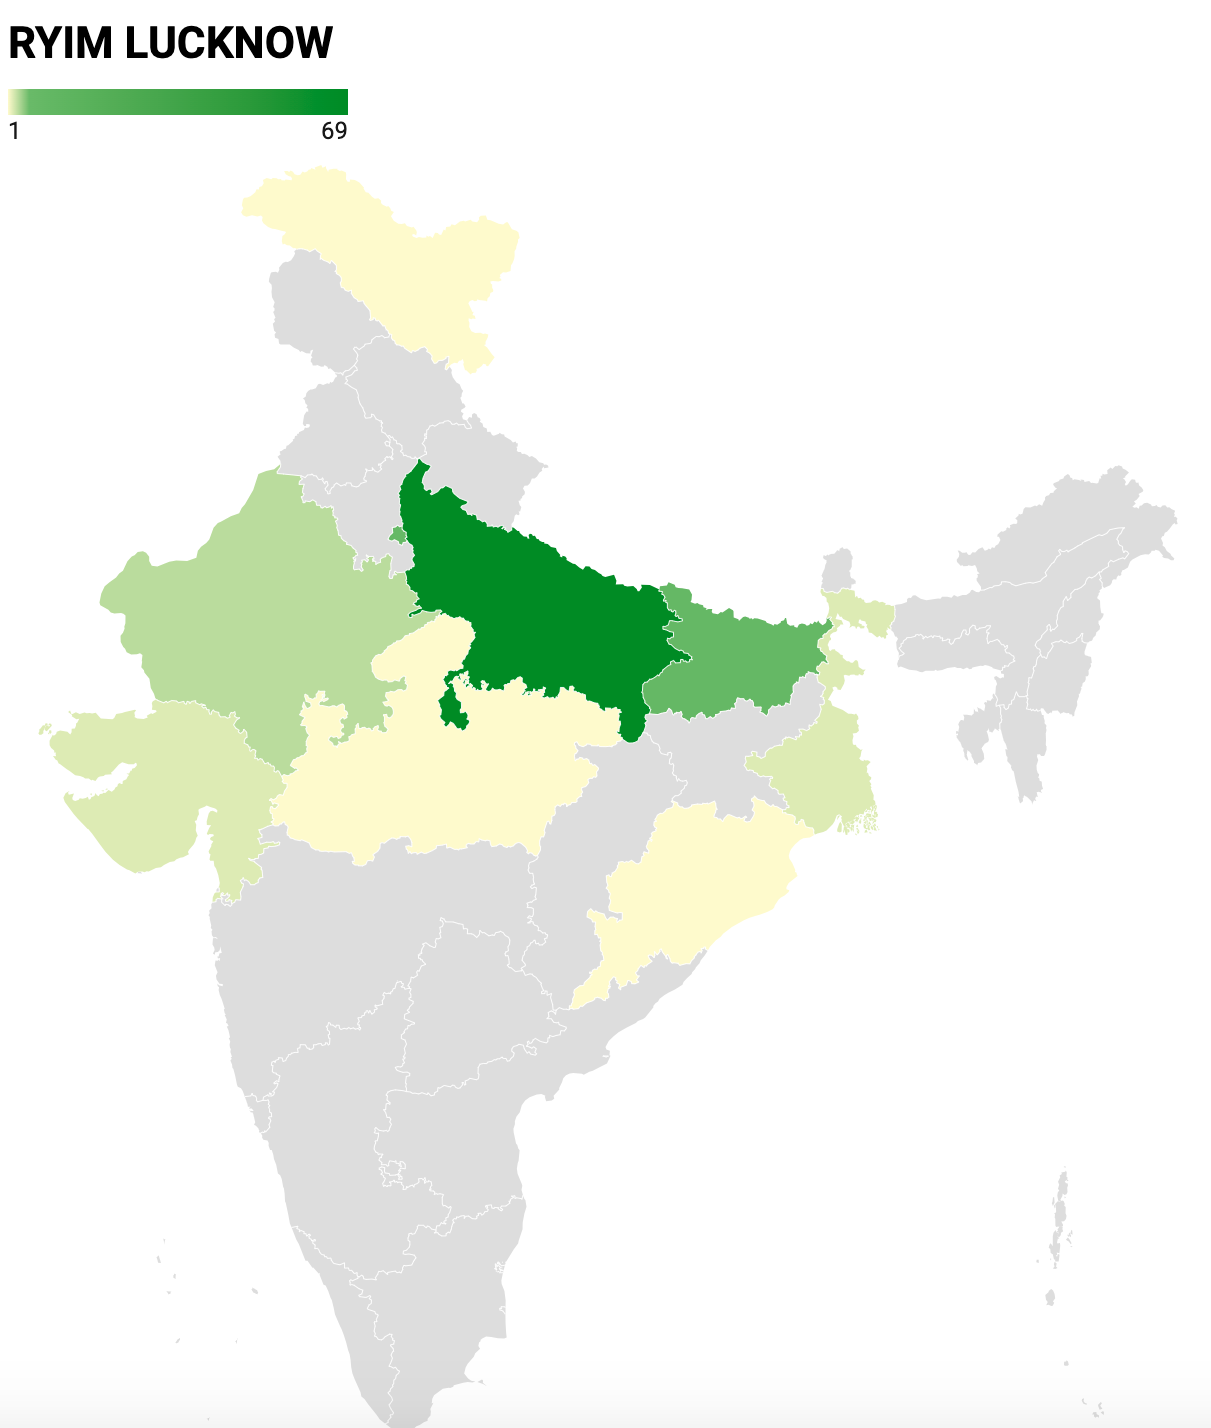 Map of India showing representation of RYIM Lucknow participants encompassing participation from seven states and two union territories using Datawrapper tool. Credit: Vedant Chaubey